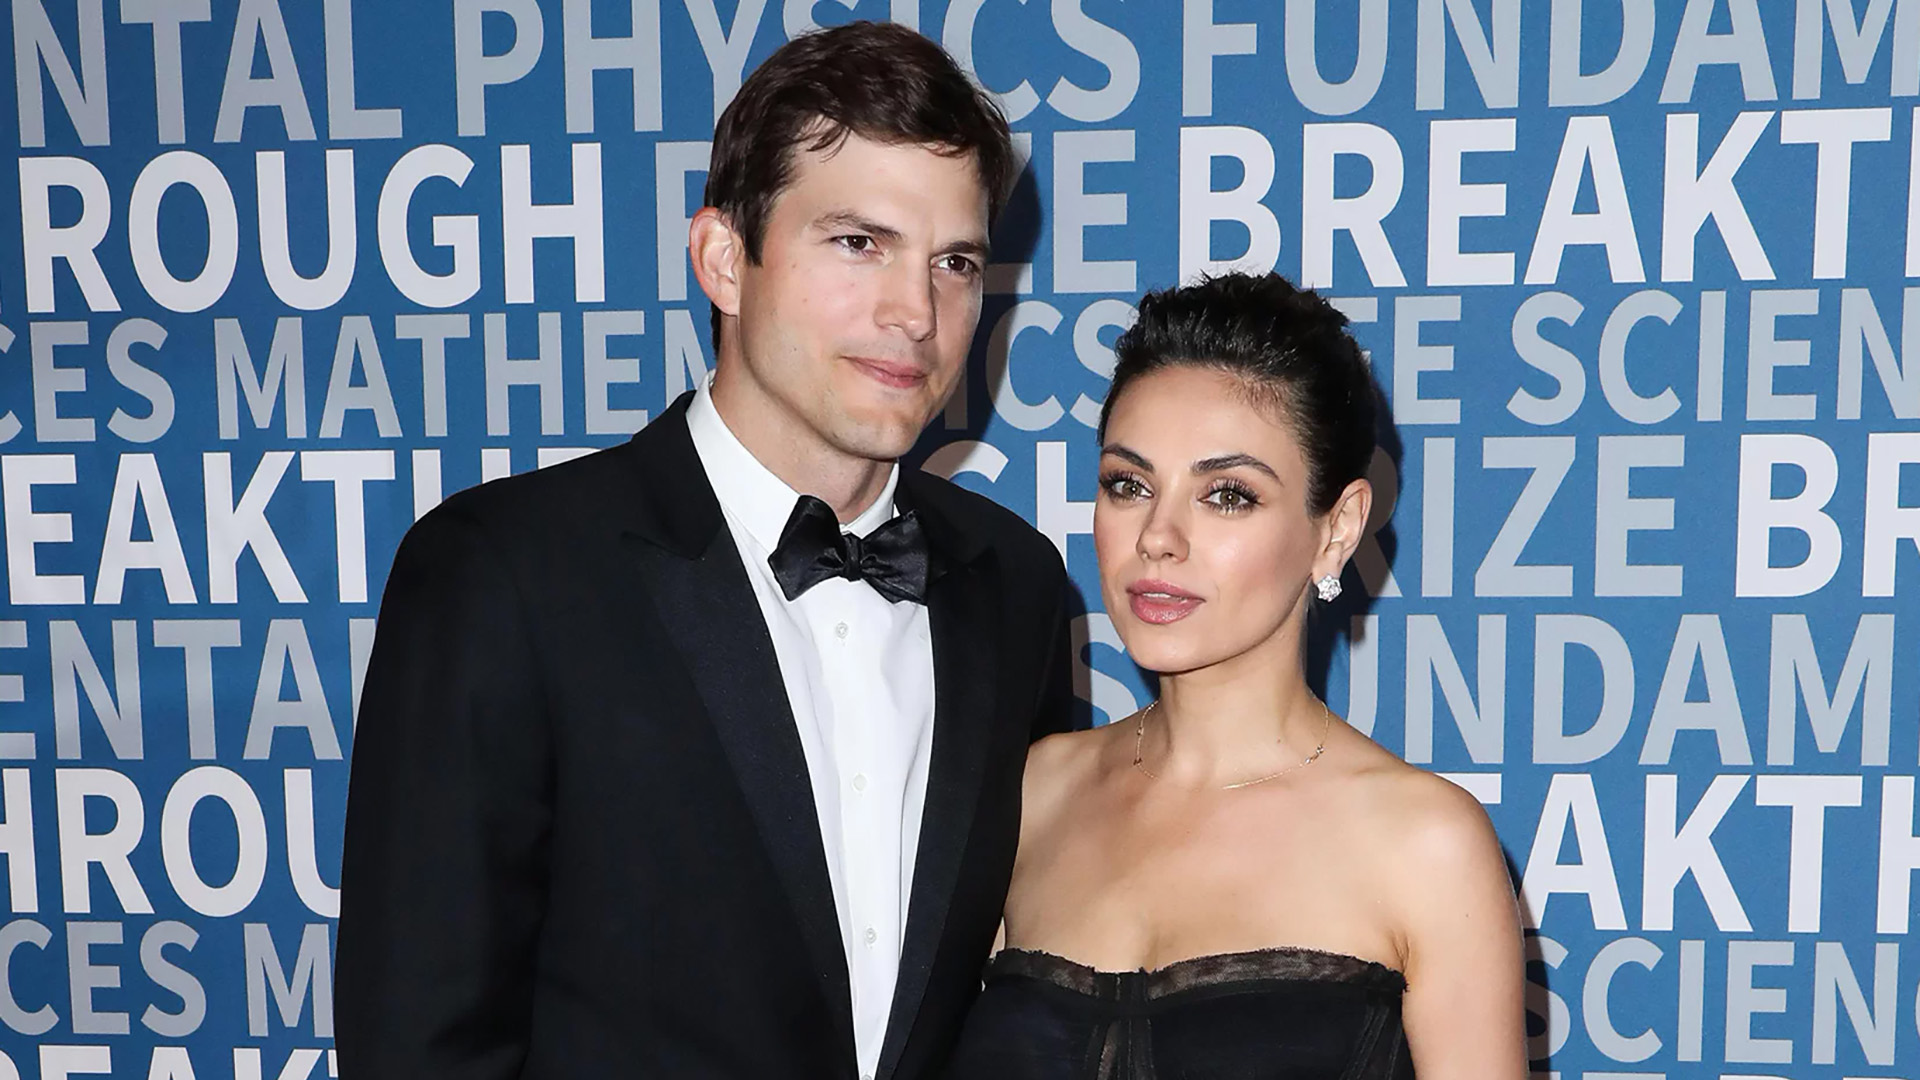 From Co-Stars to Soulmates: The Epic Love Story of Ashton Kutcher and Mila Kunis